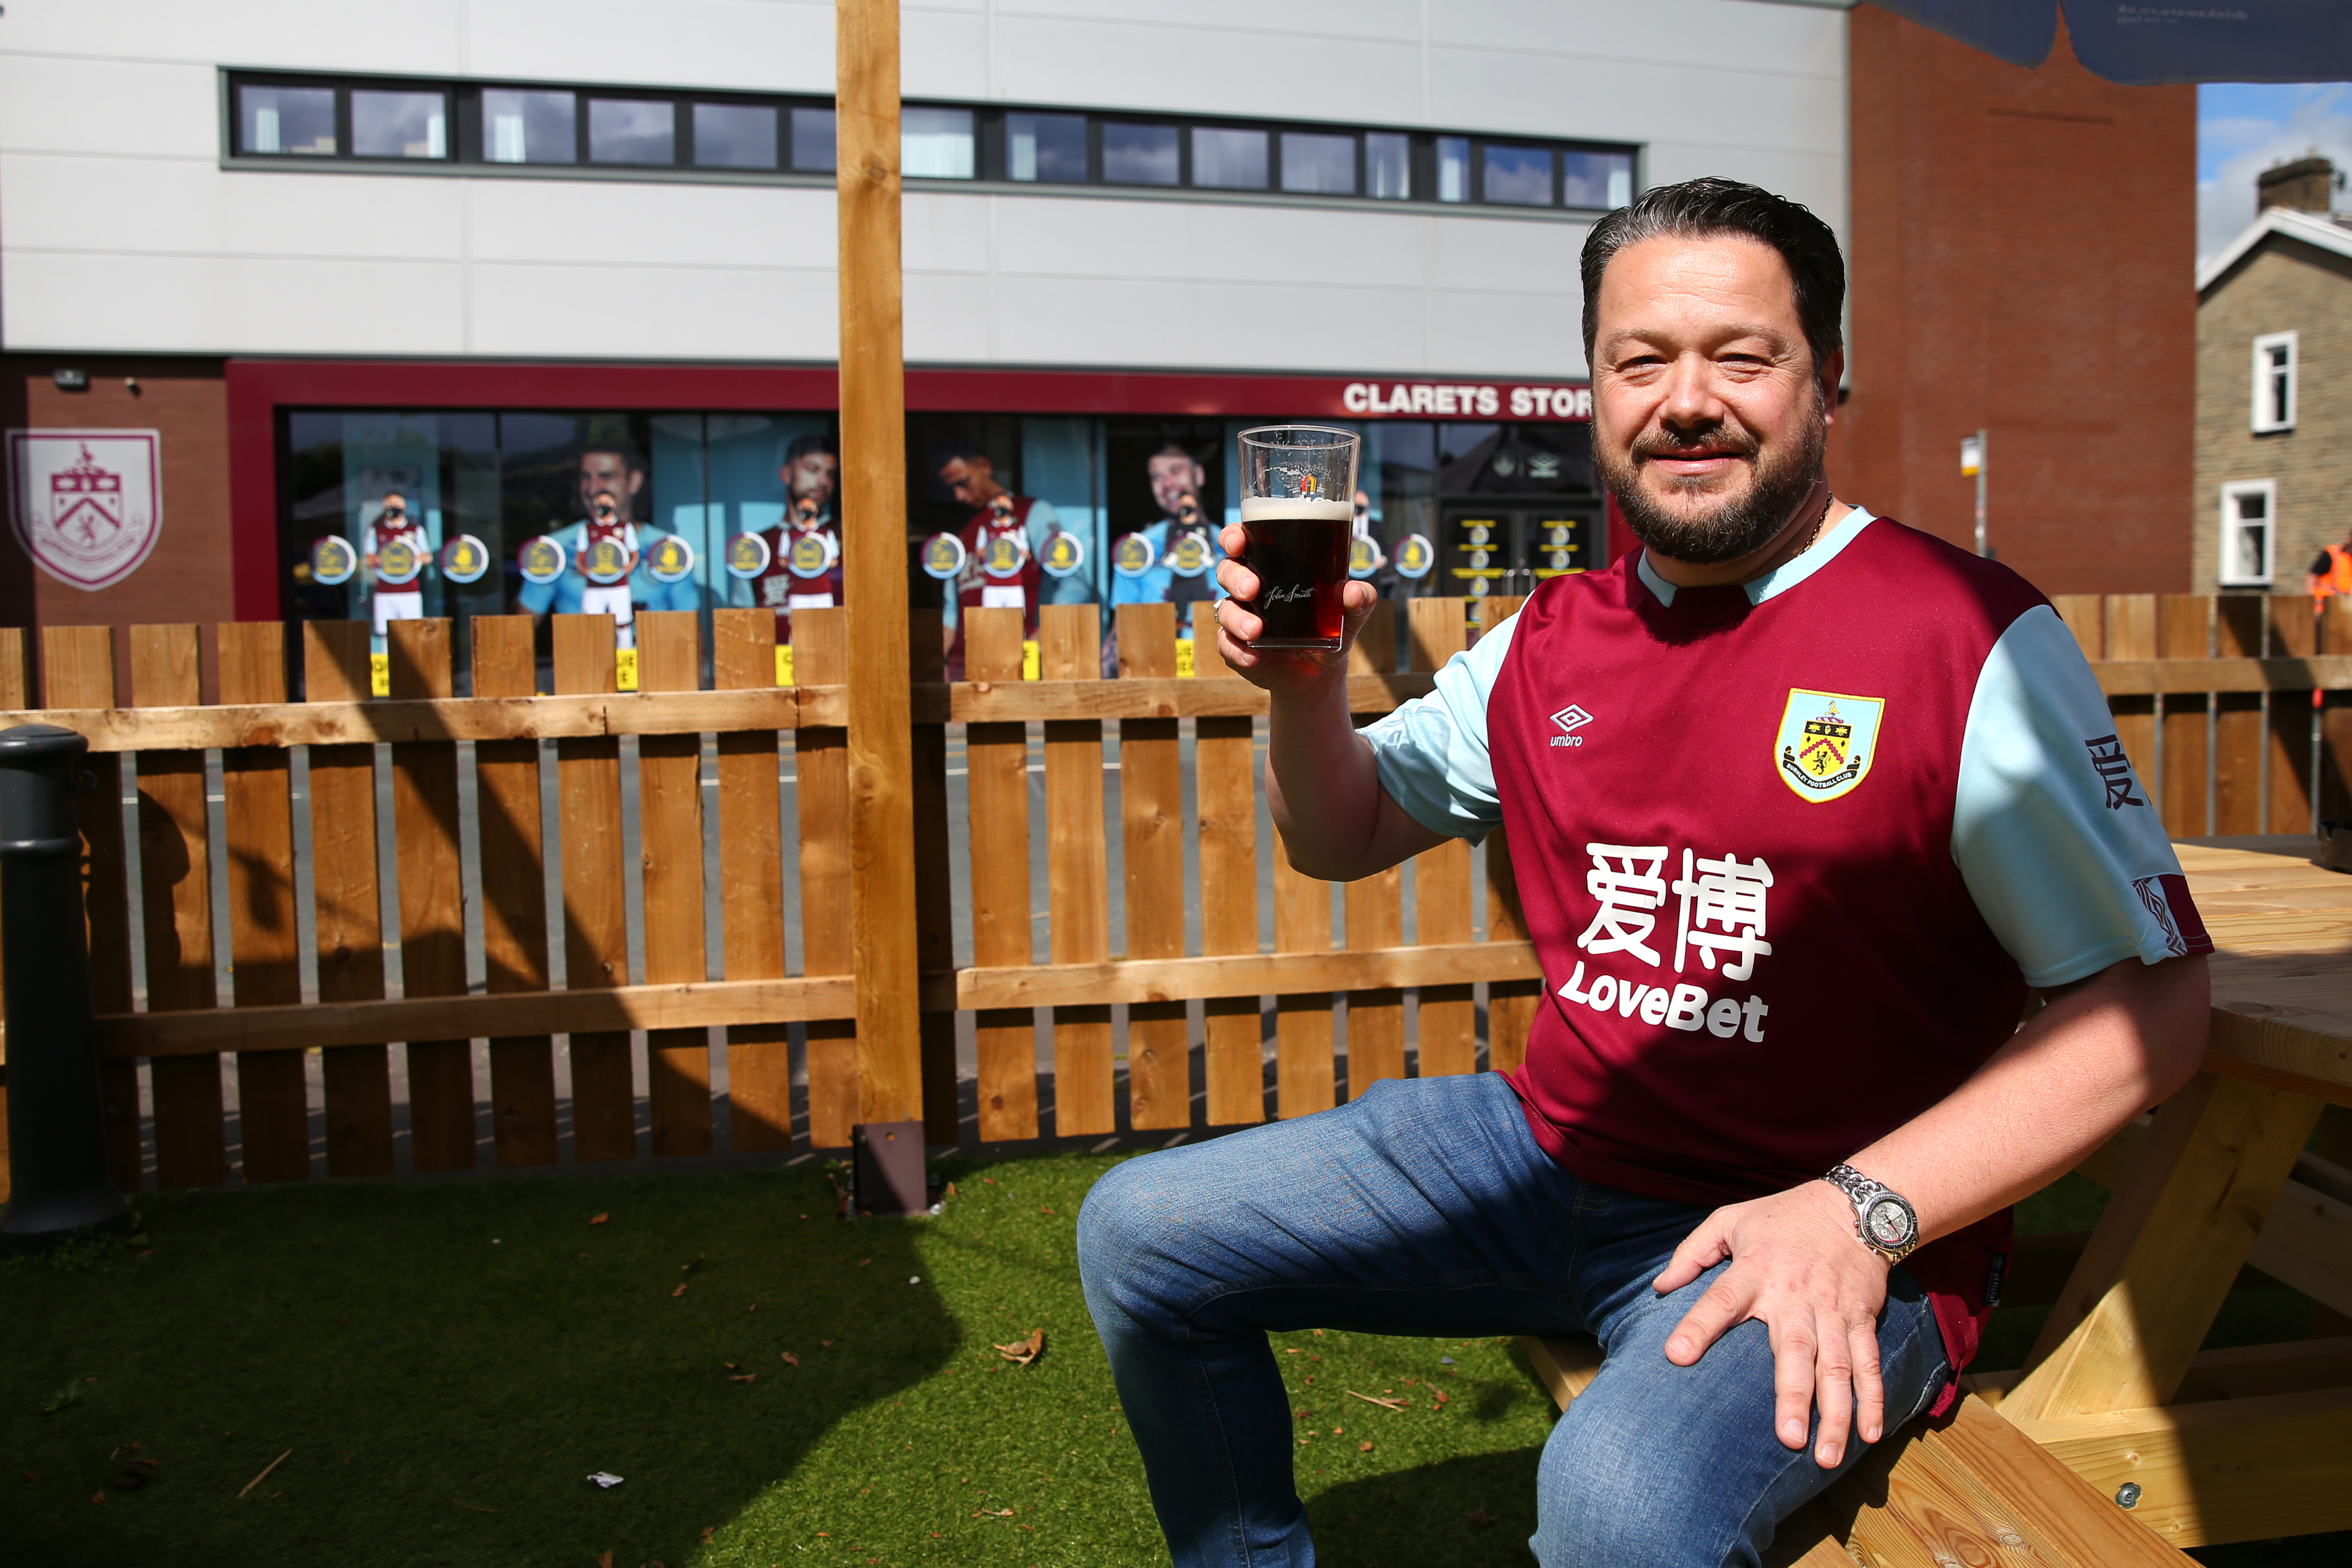 Burnley fan enjoys a beer at the pub outside the stadium prior to a match - Premier League